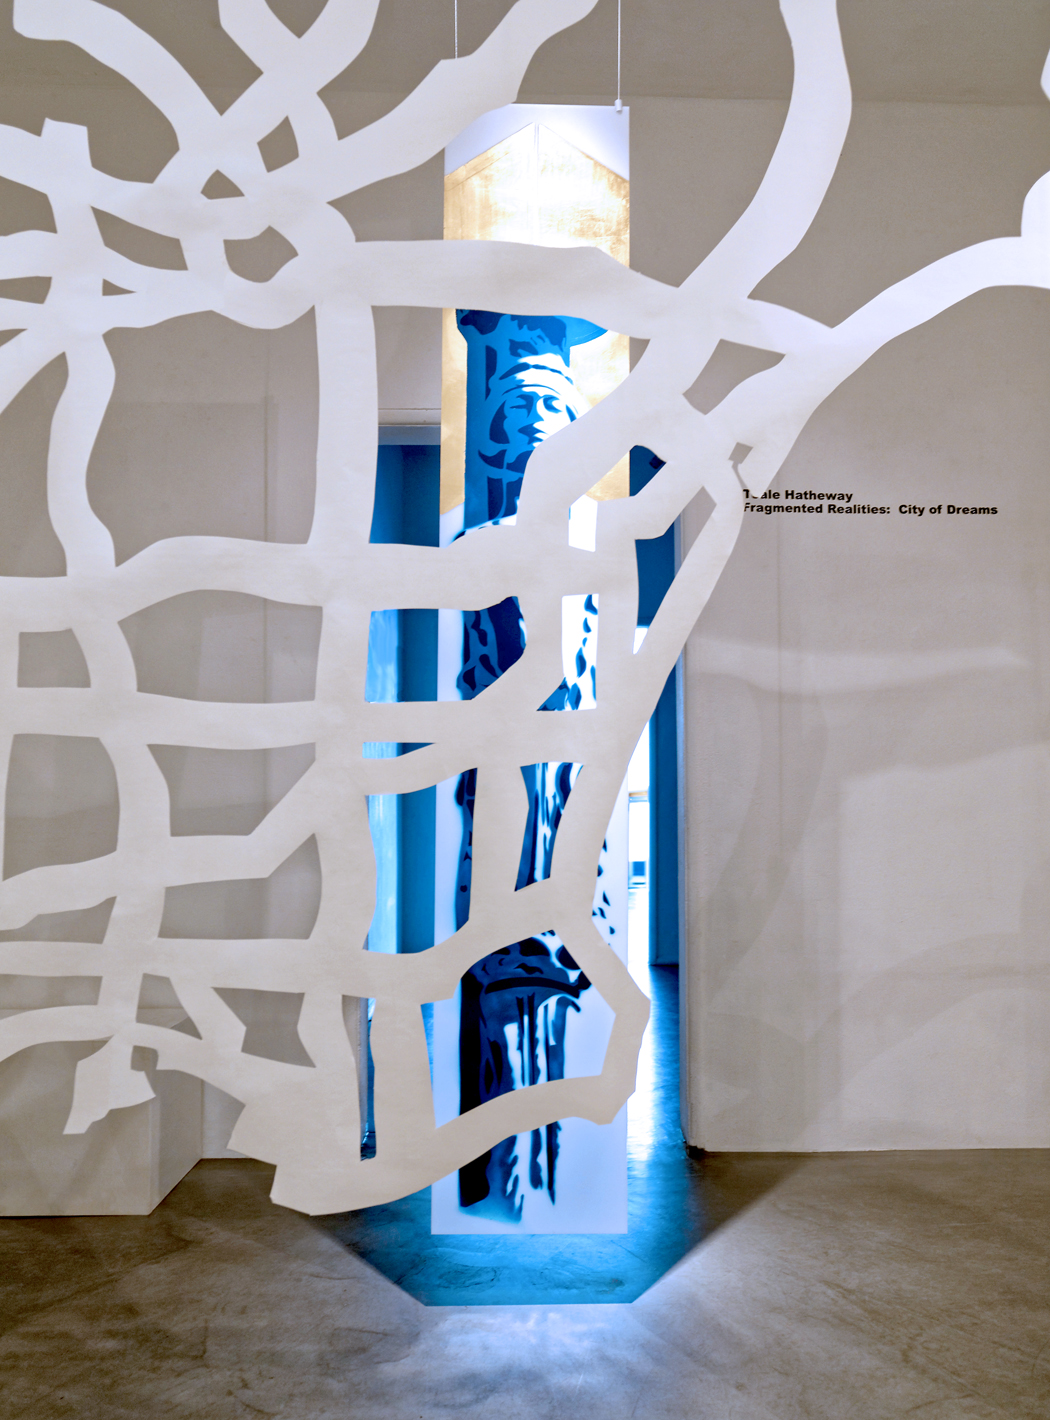 Fragmented Realities_Teale Hatheway_Installation Art with maps